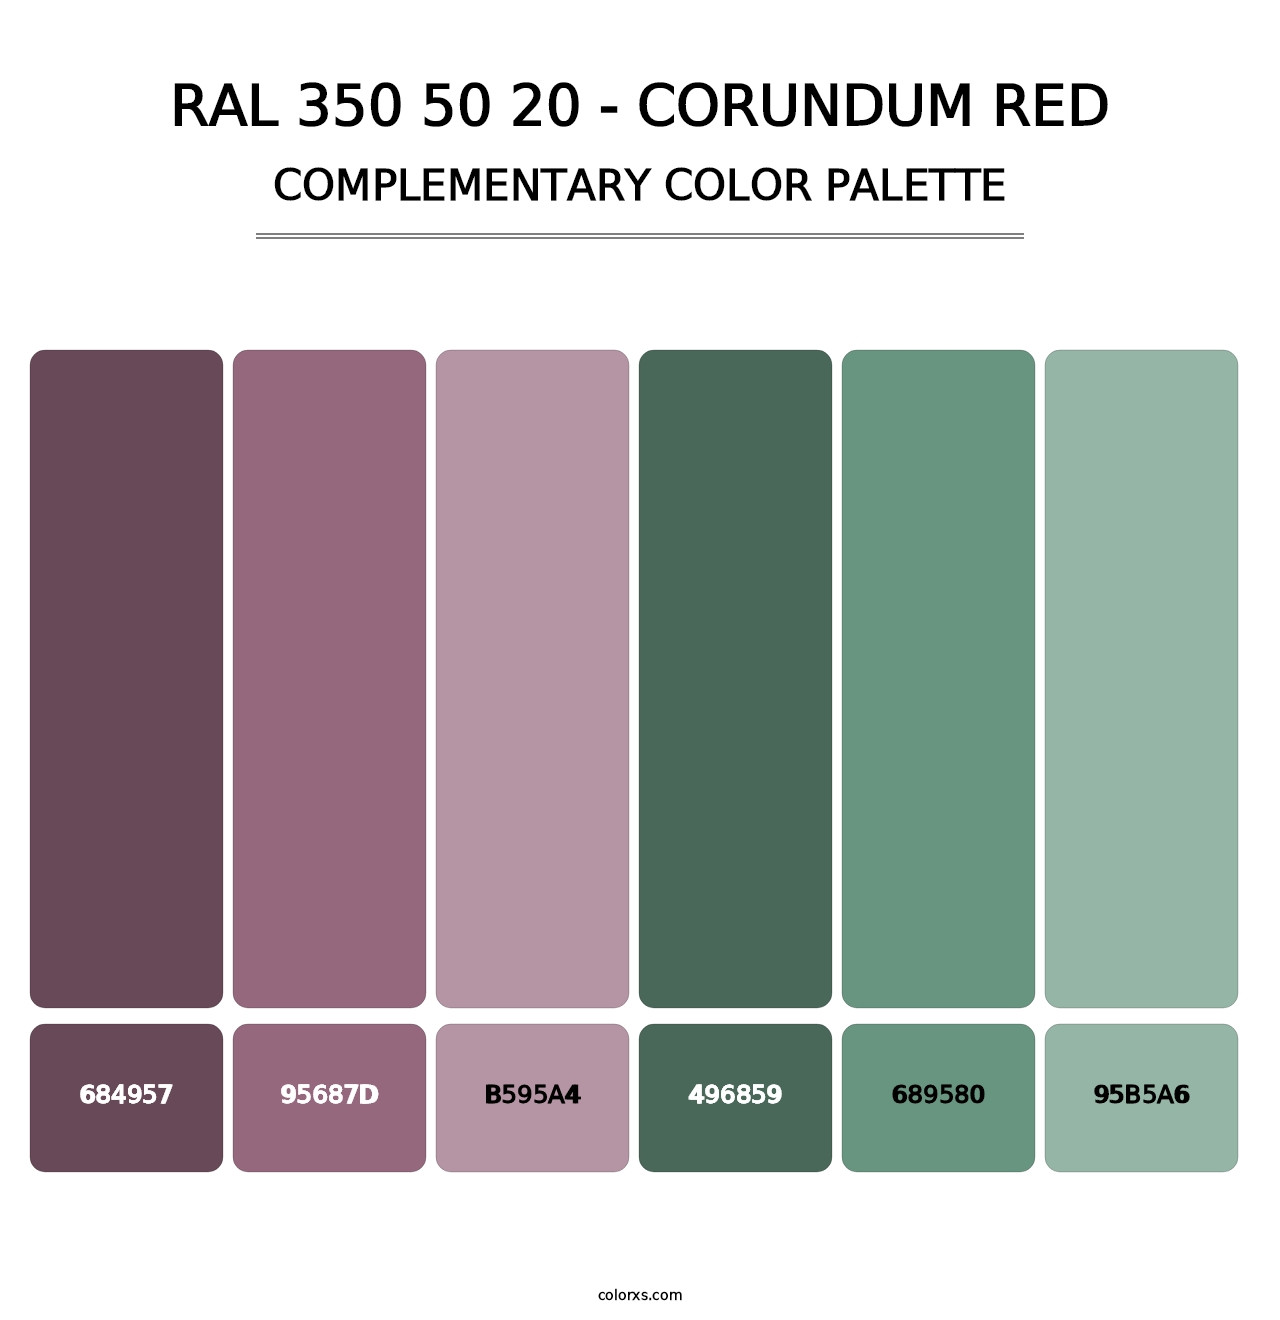 RAL 350 50 20 - Corundum Red - Complementary Color Palette